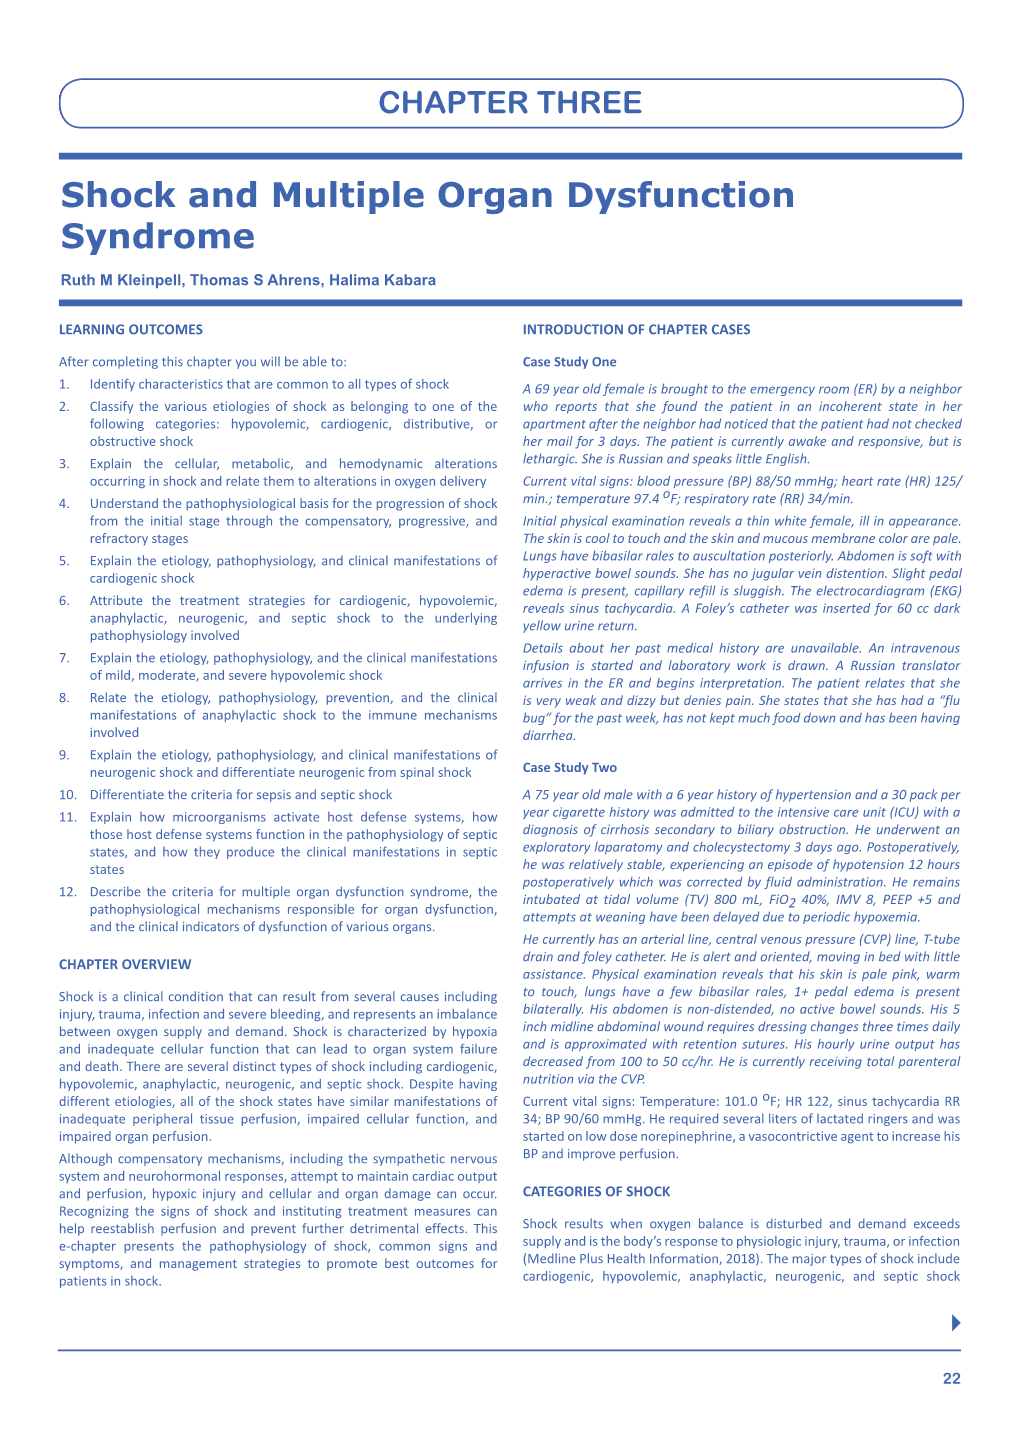 Shock and Multiple Organ Dysfunction Syndrome